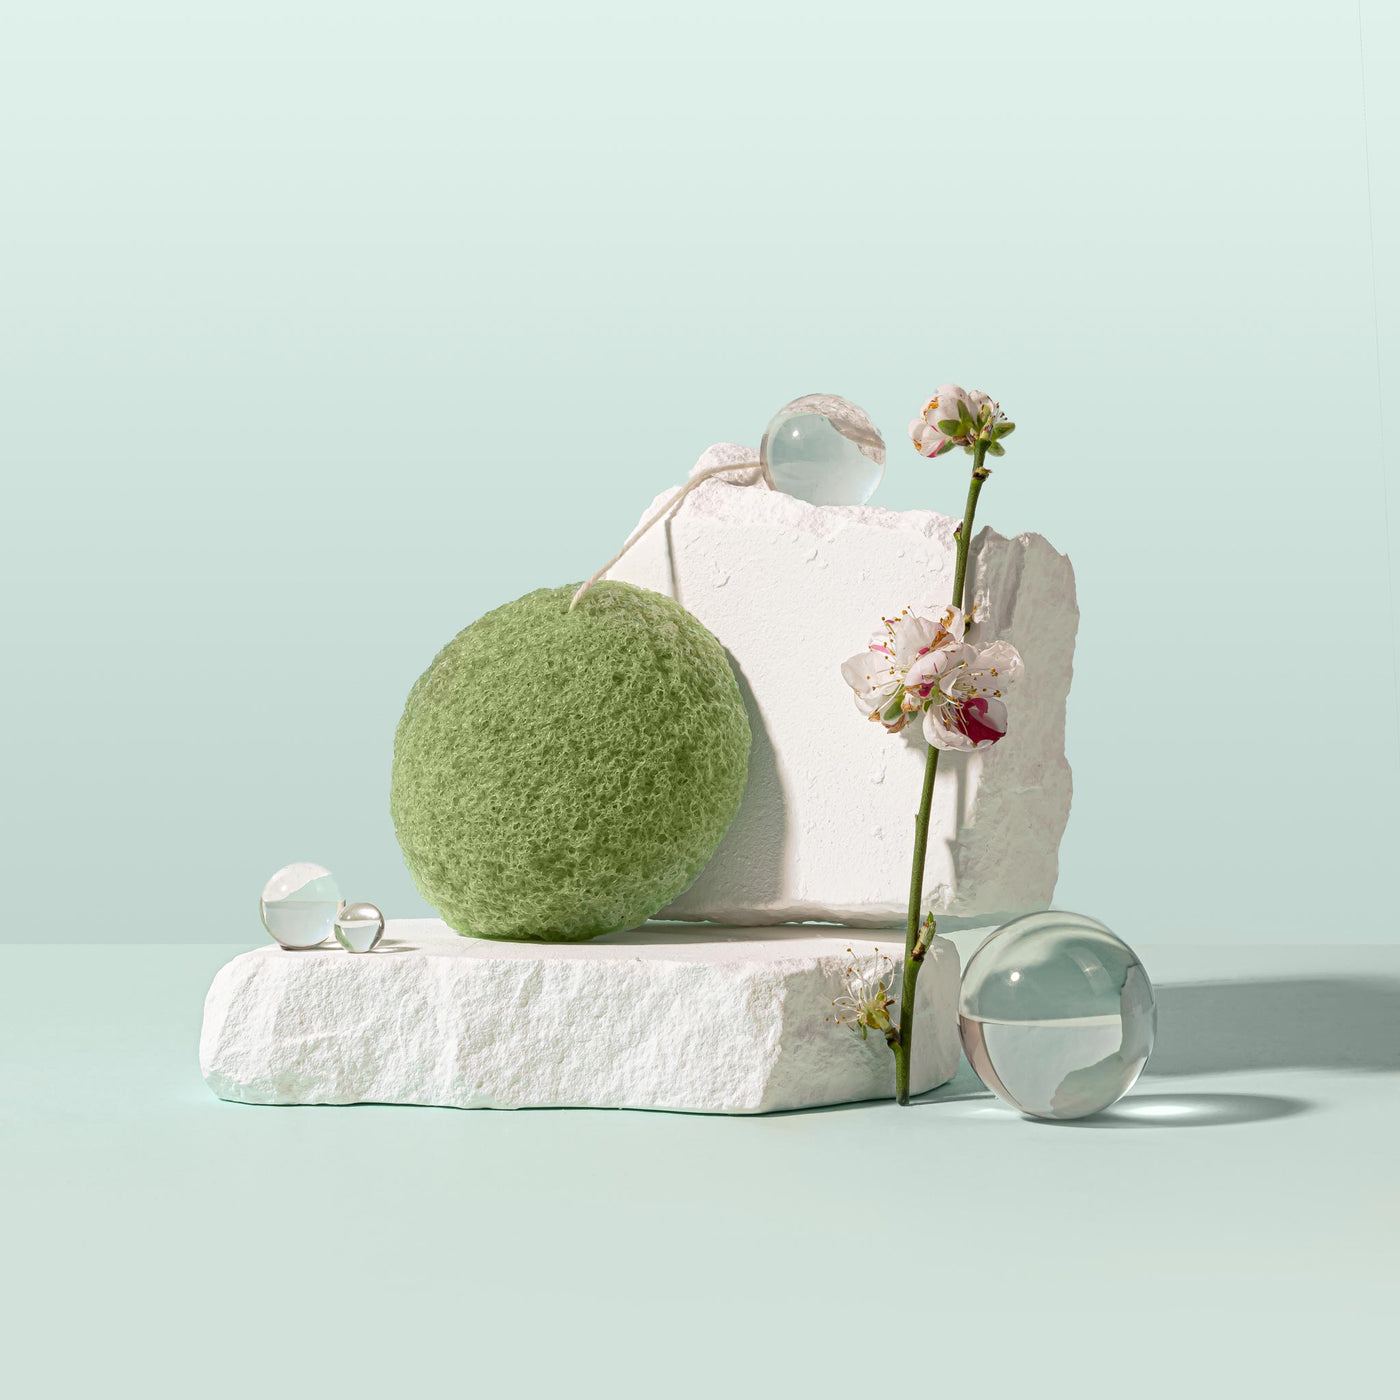 konjac sponge made in Japan Gently exfoliates and cleanses skin, with a soft, bouncy pudding like texture when soaked in water